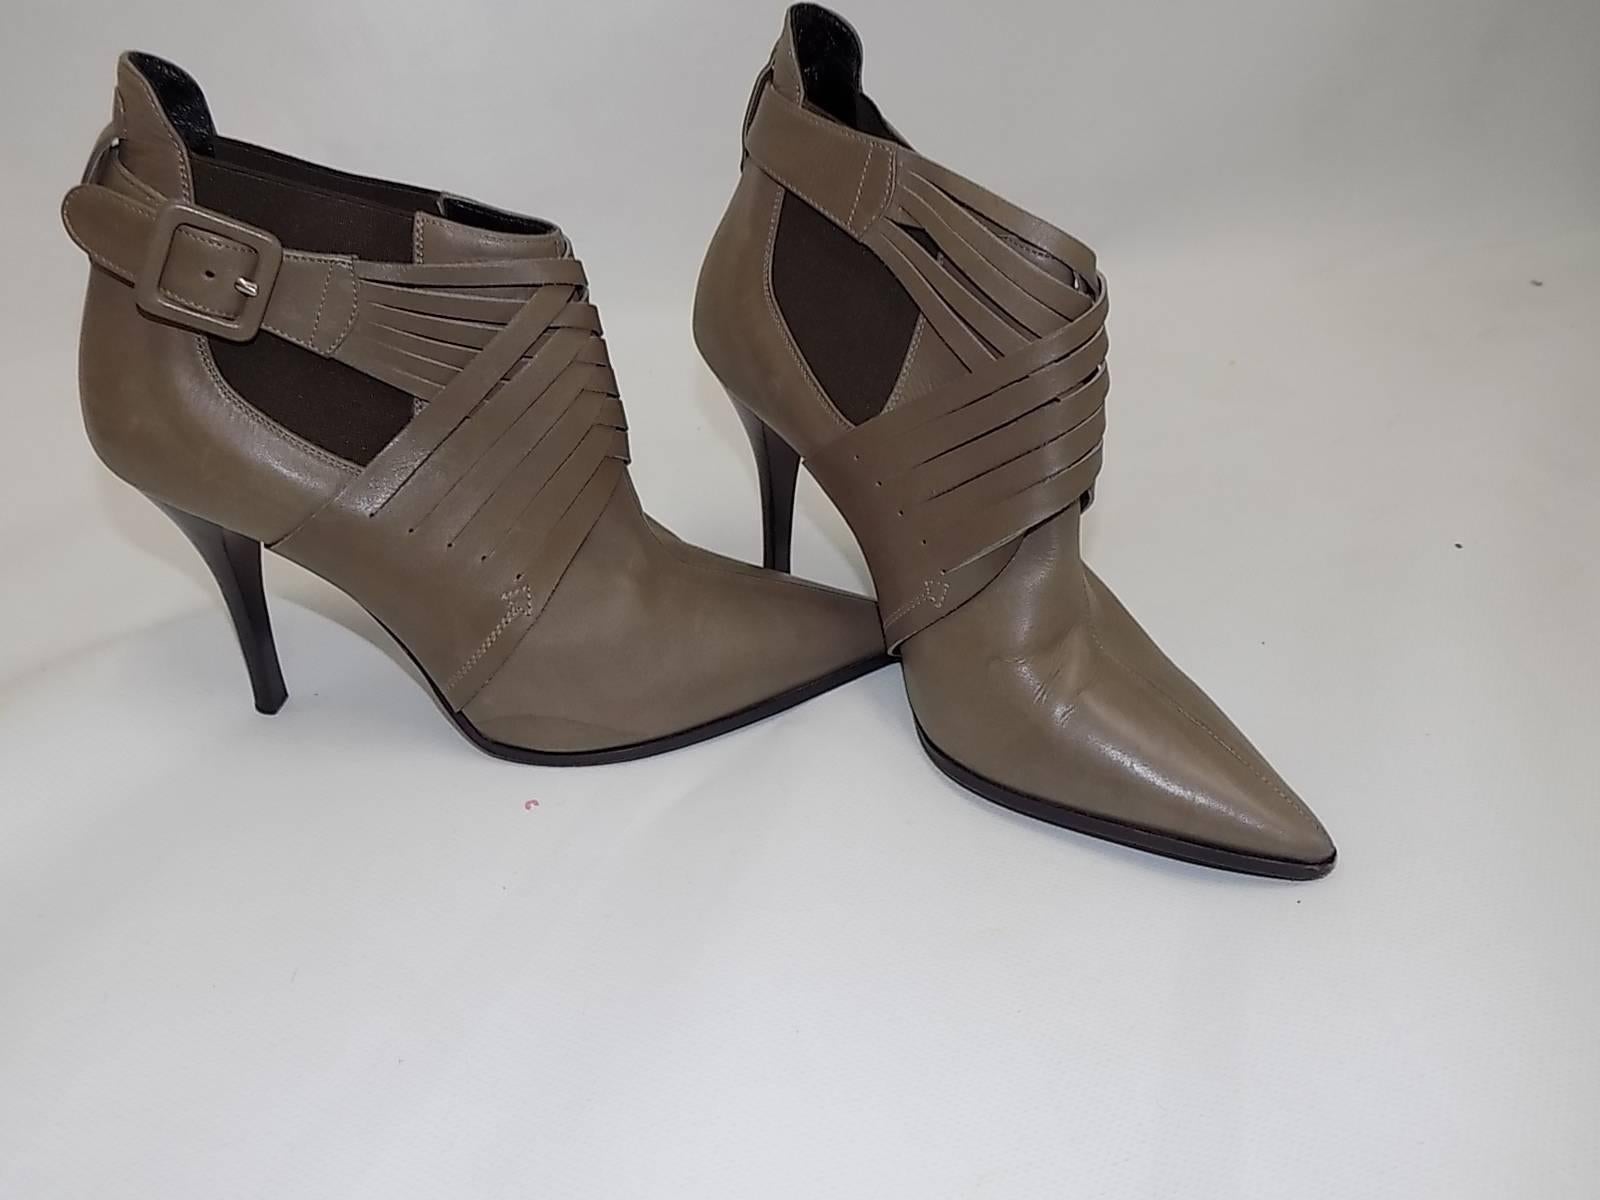 Fabulous grey Hermes booties. Cris  front detail, pointy toe cross , side buckle, elastic on both sides. 4 inch stacked heel. Worn once in  excellent condition. Size 37. Dust bag included